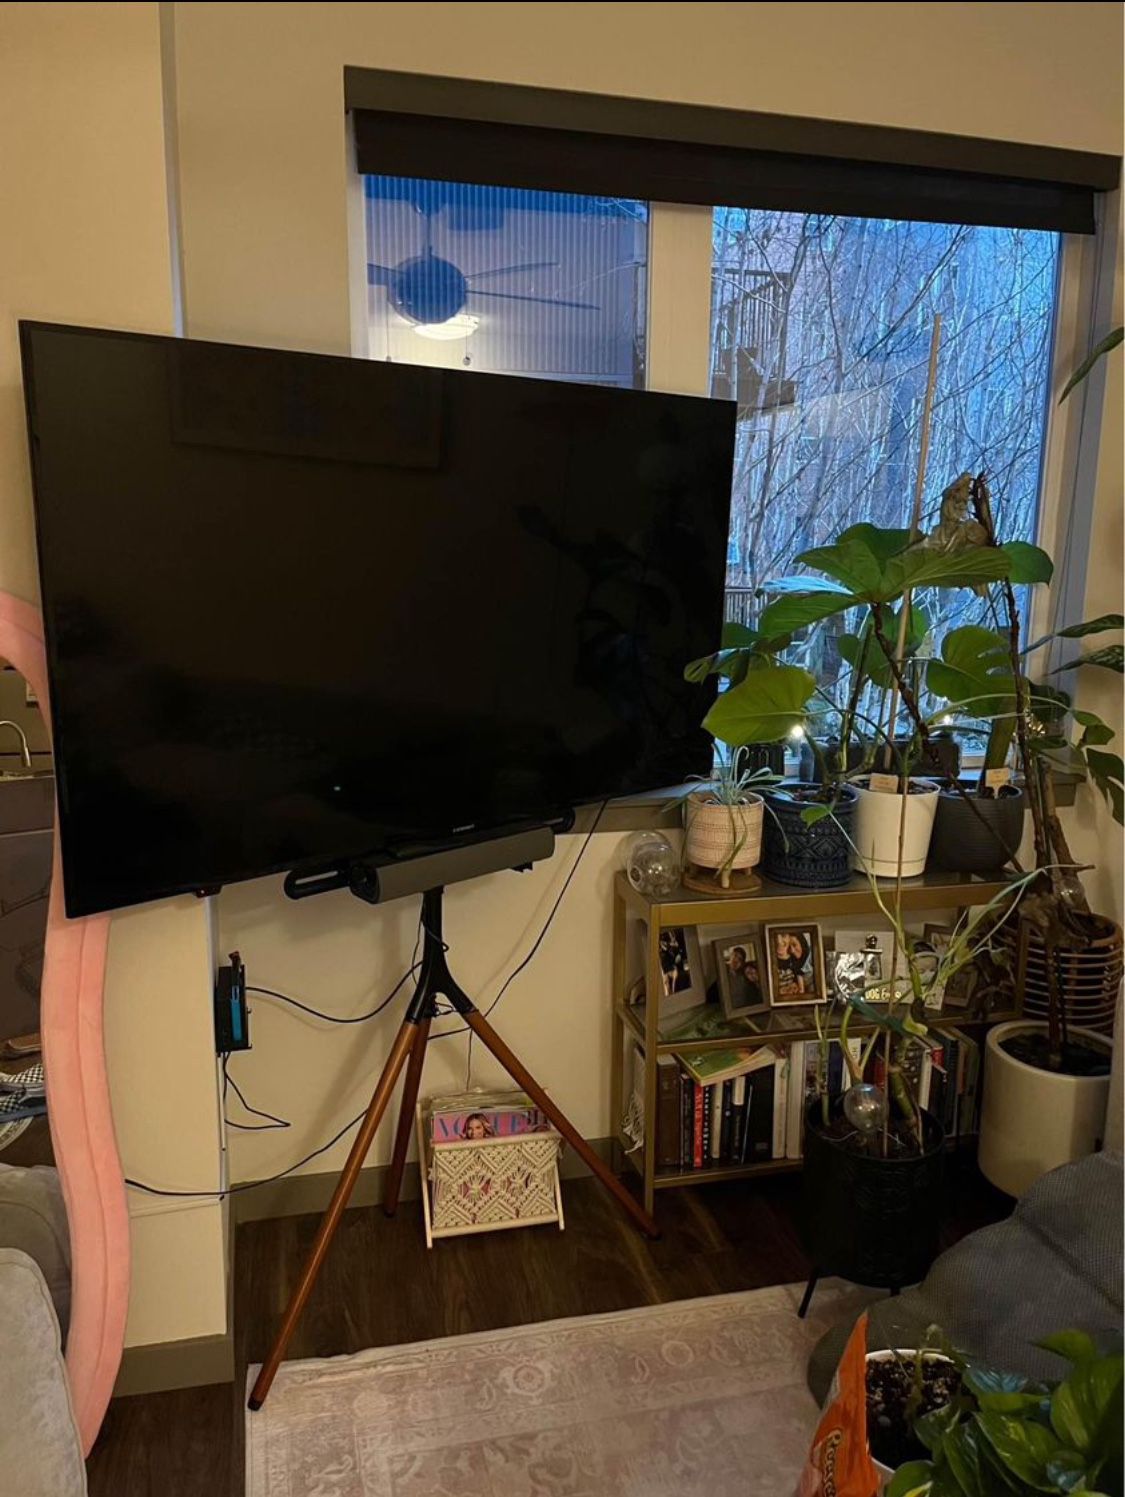 Easel Tv Stand